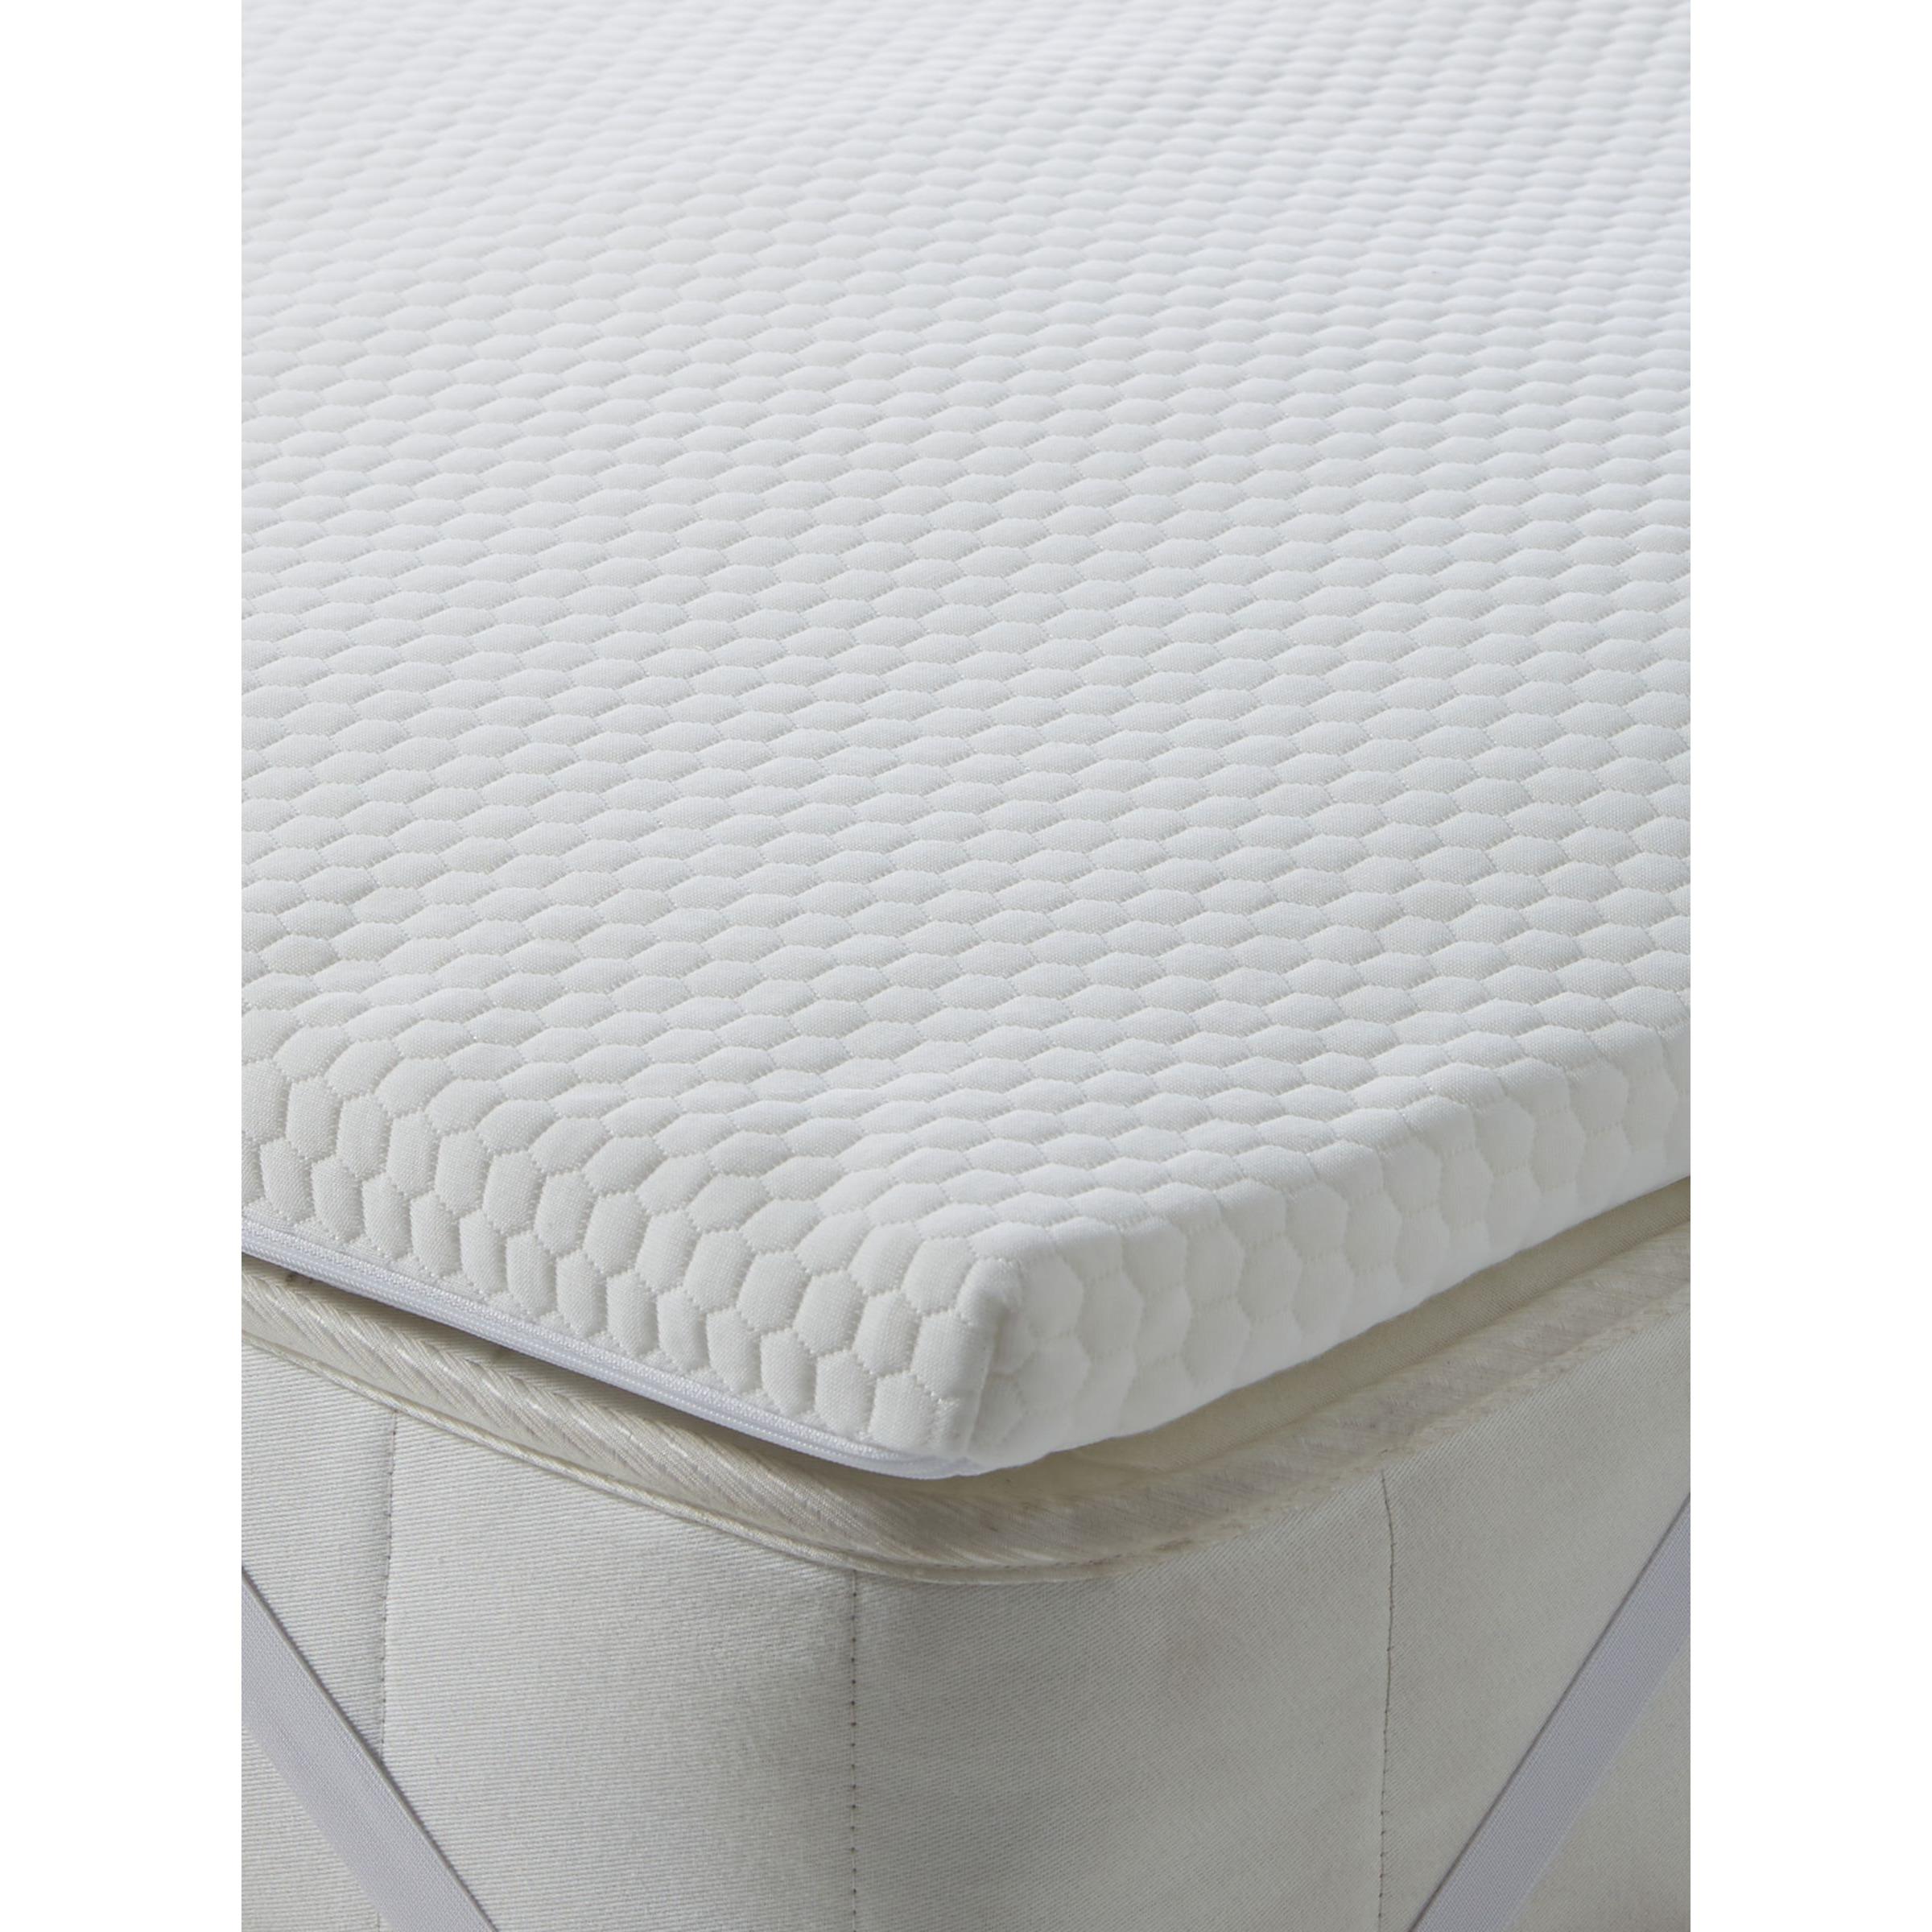 John Lewis Specialist Synthetic 5-Zone Support Memory Foam Mattress Topper - image 1